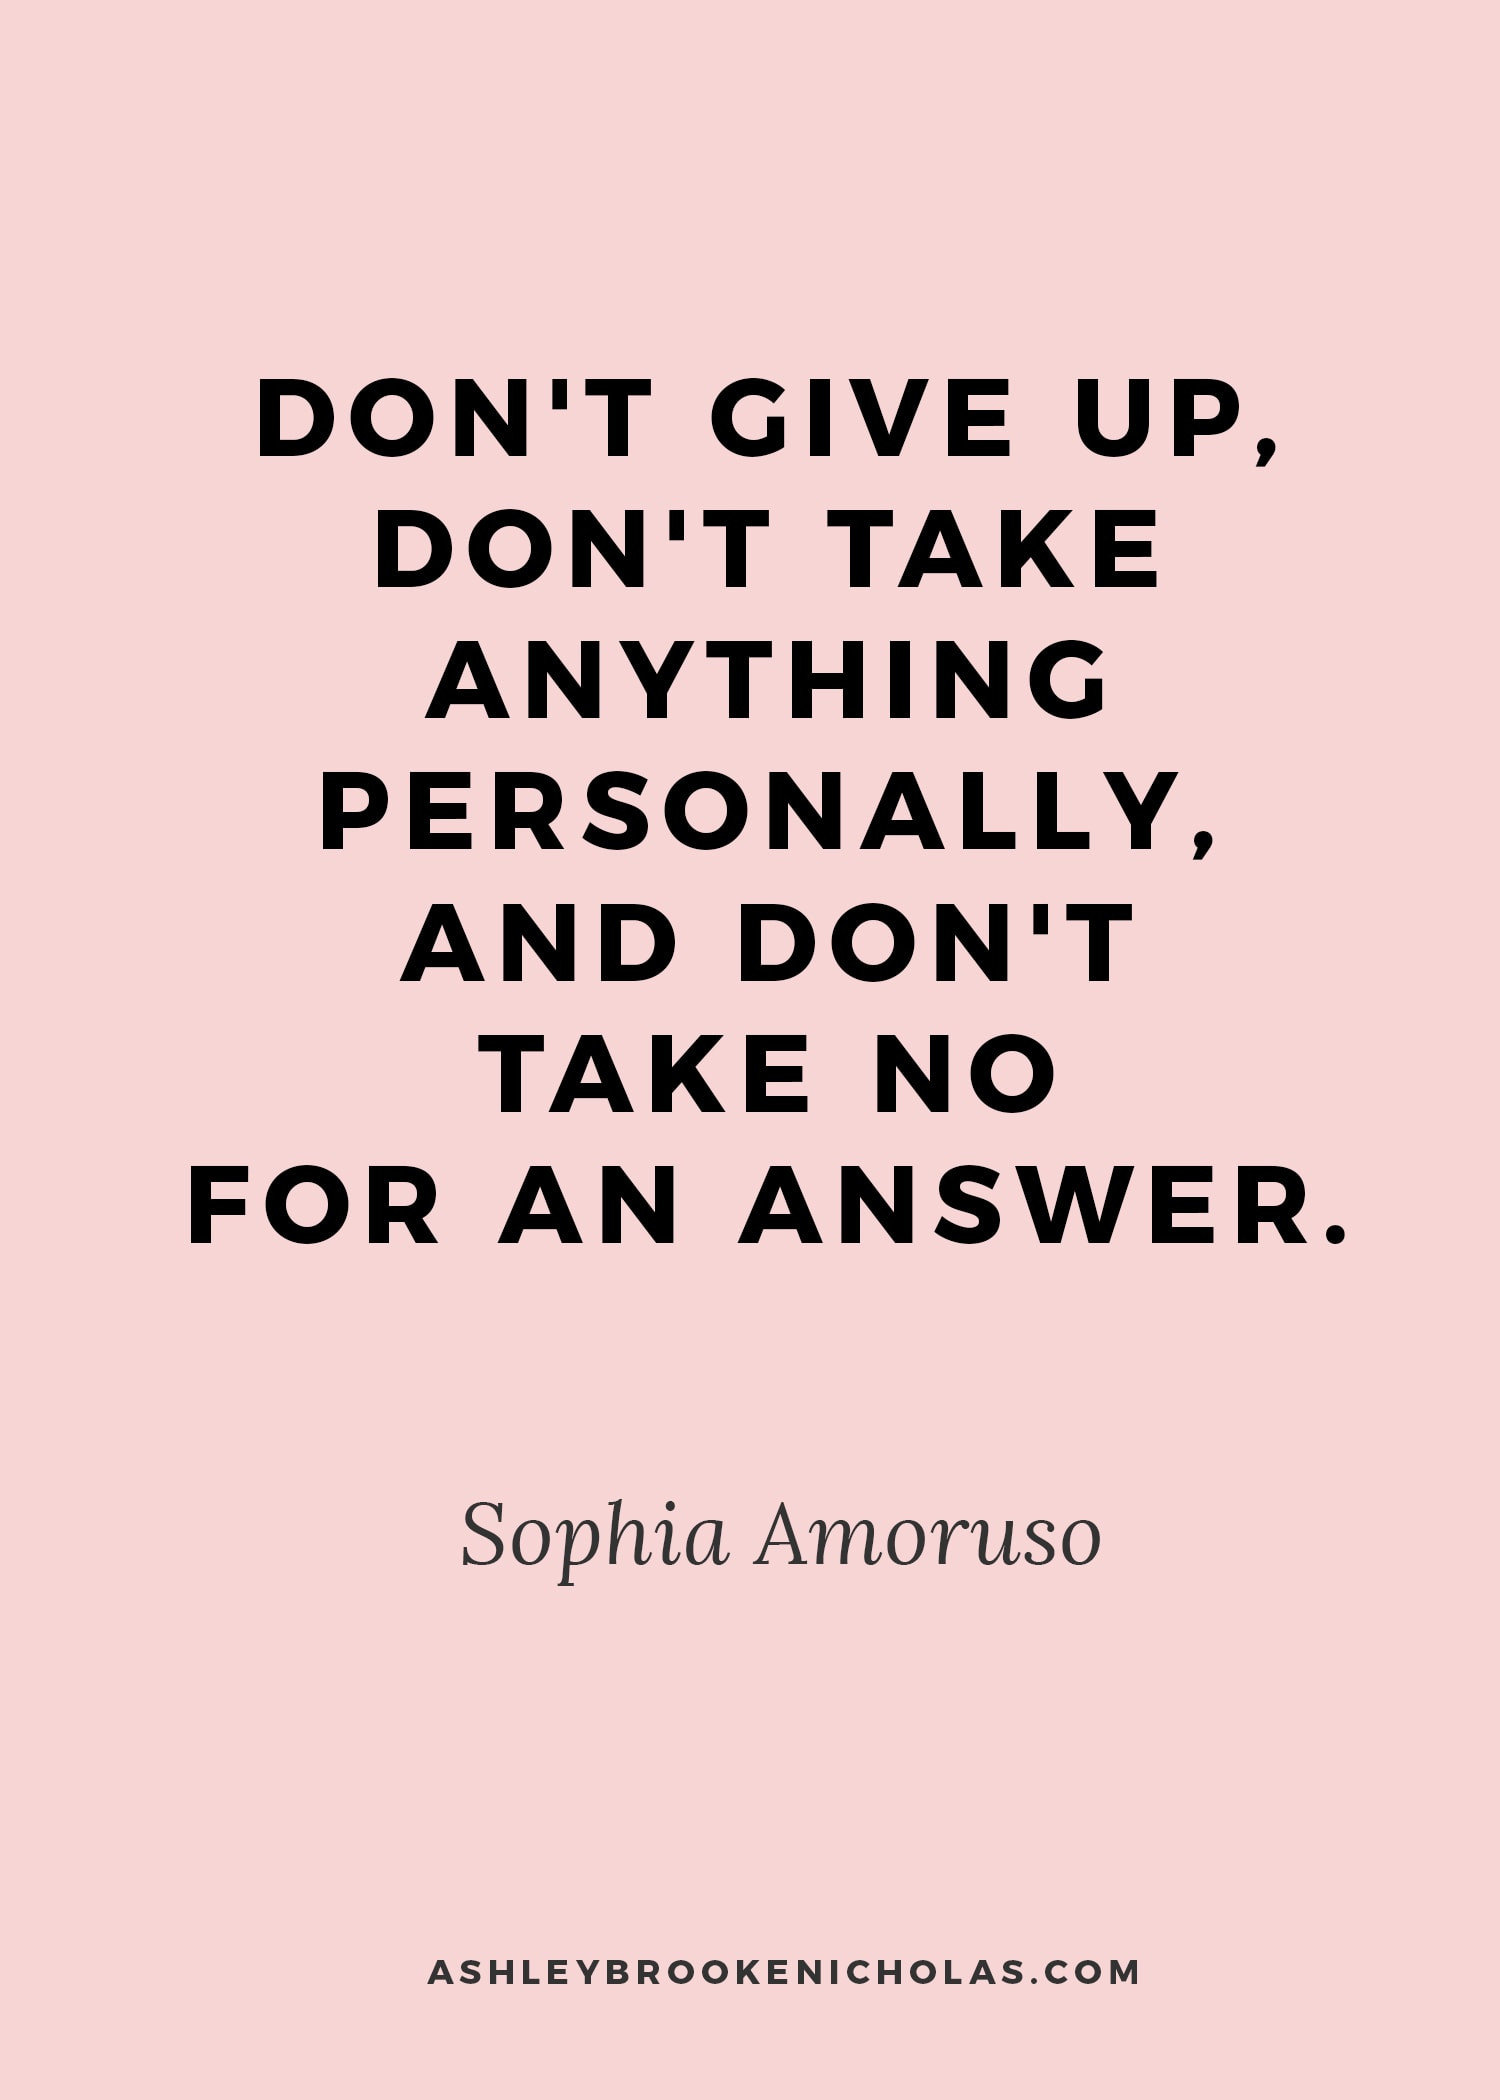 Inspirational Quotes For Girls
 10 Quotes for Every Girl Boss